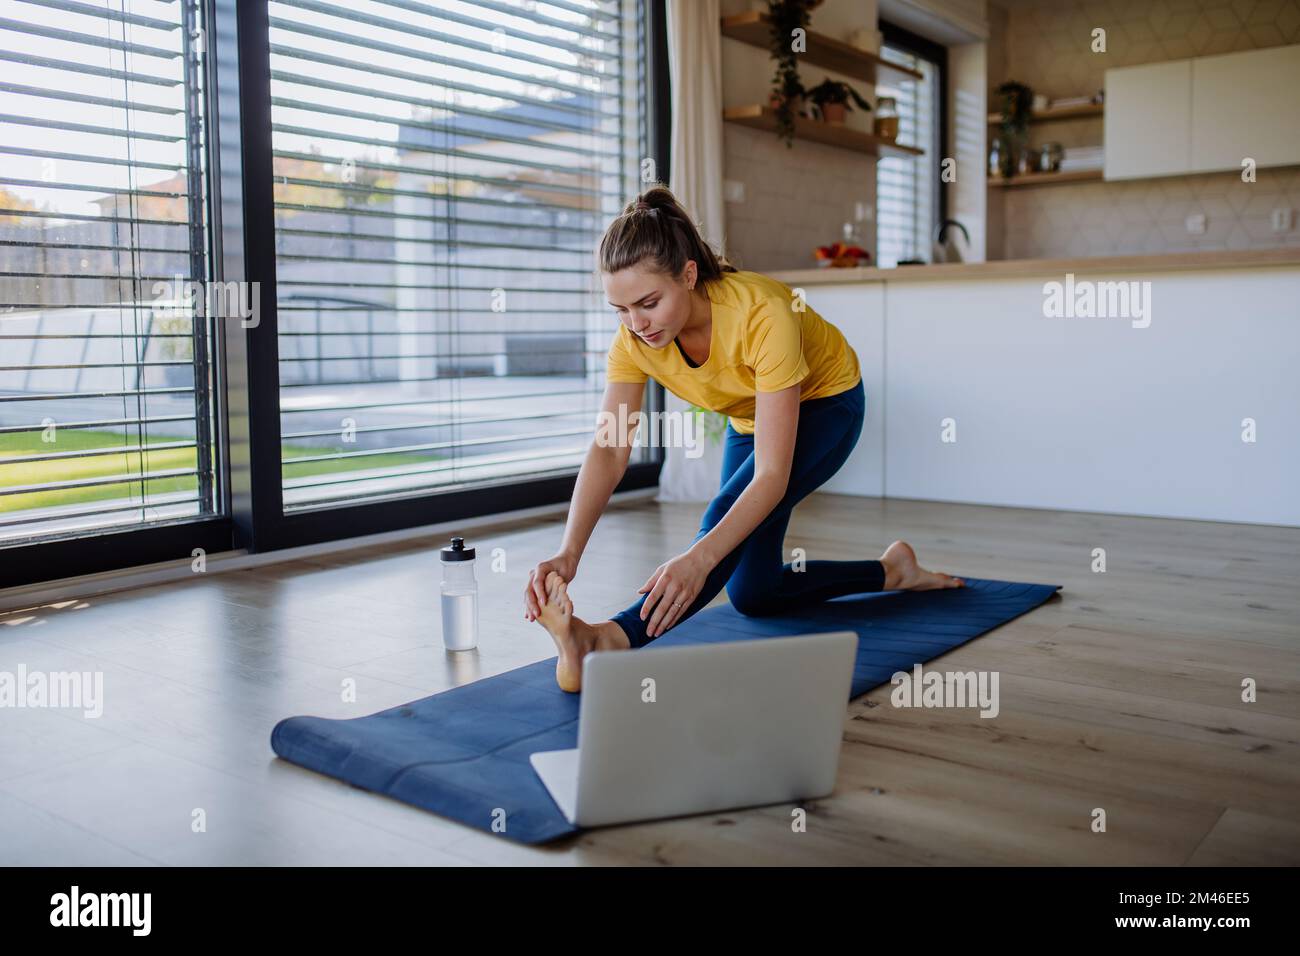 Young woman doing an exercises at home. Stock Photo